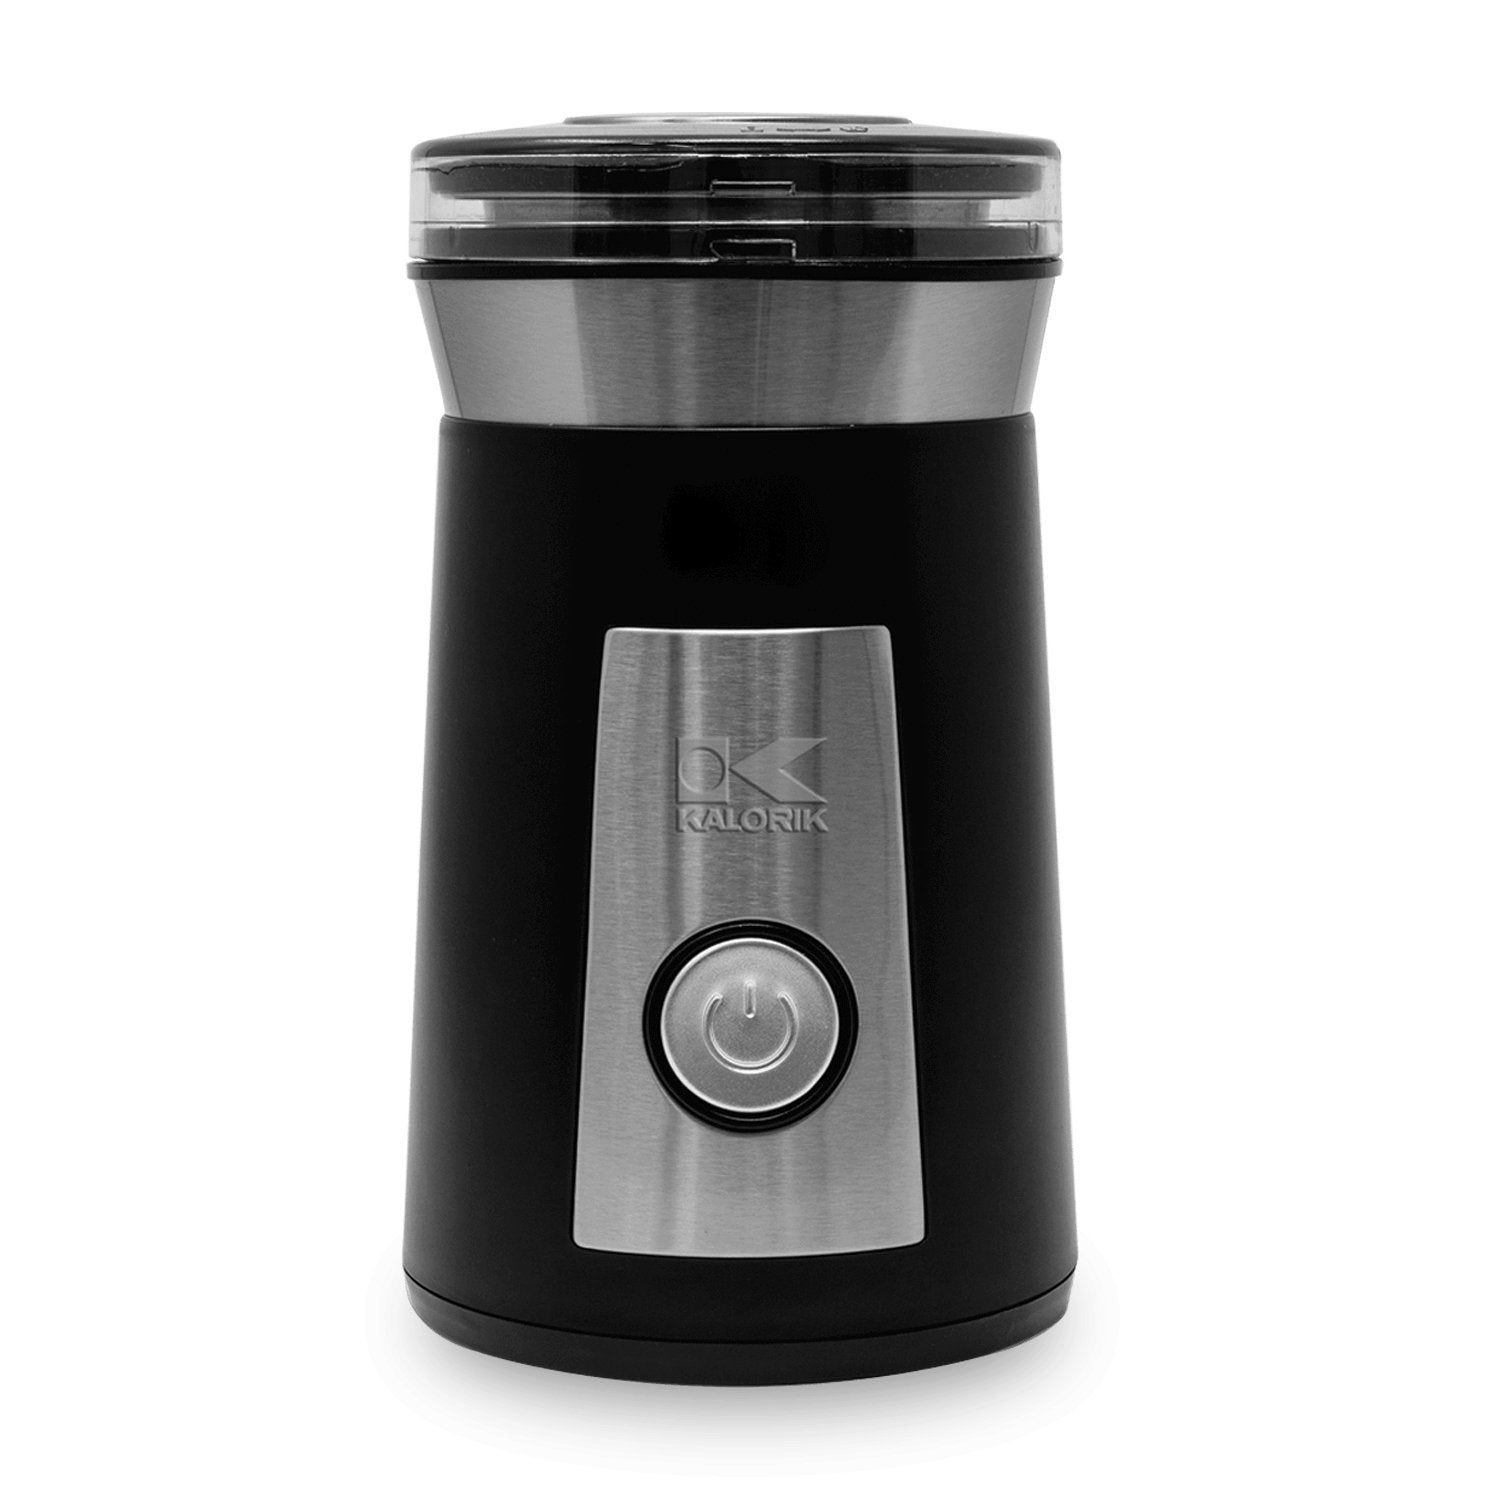 Kalorik Coffee and Spice Grinder, White and Stainless Steel